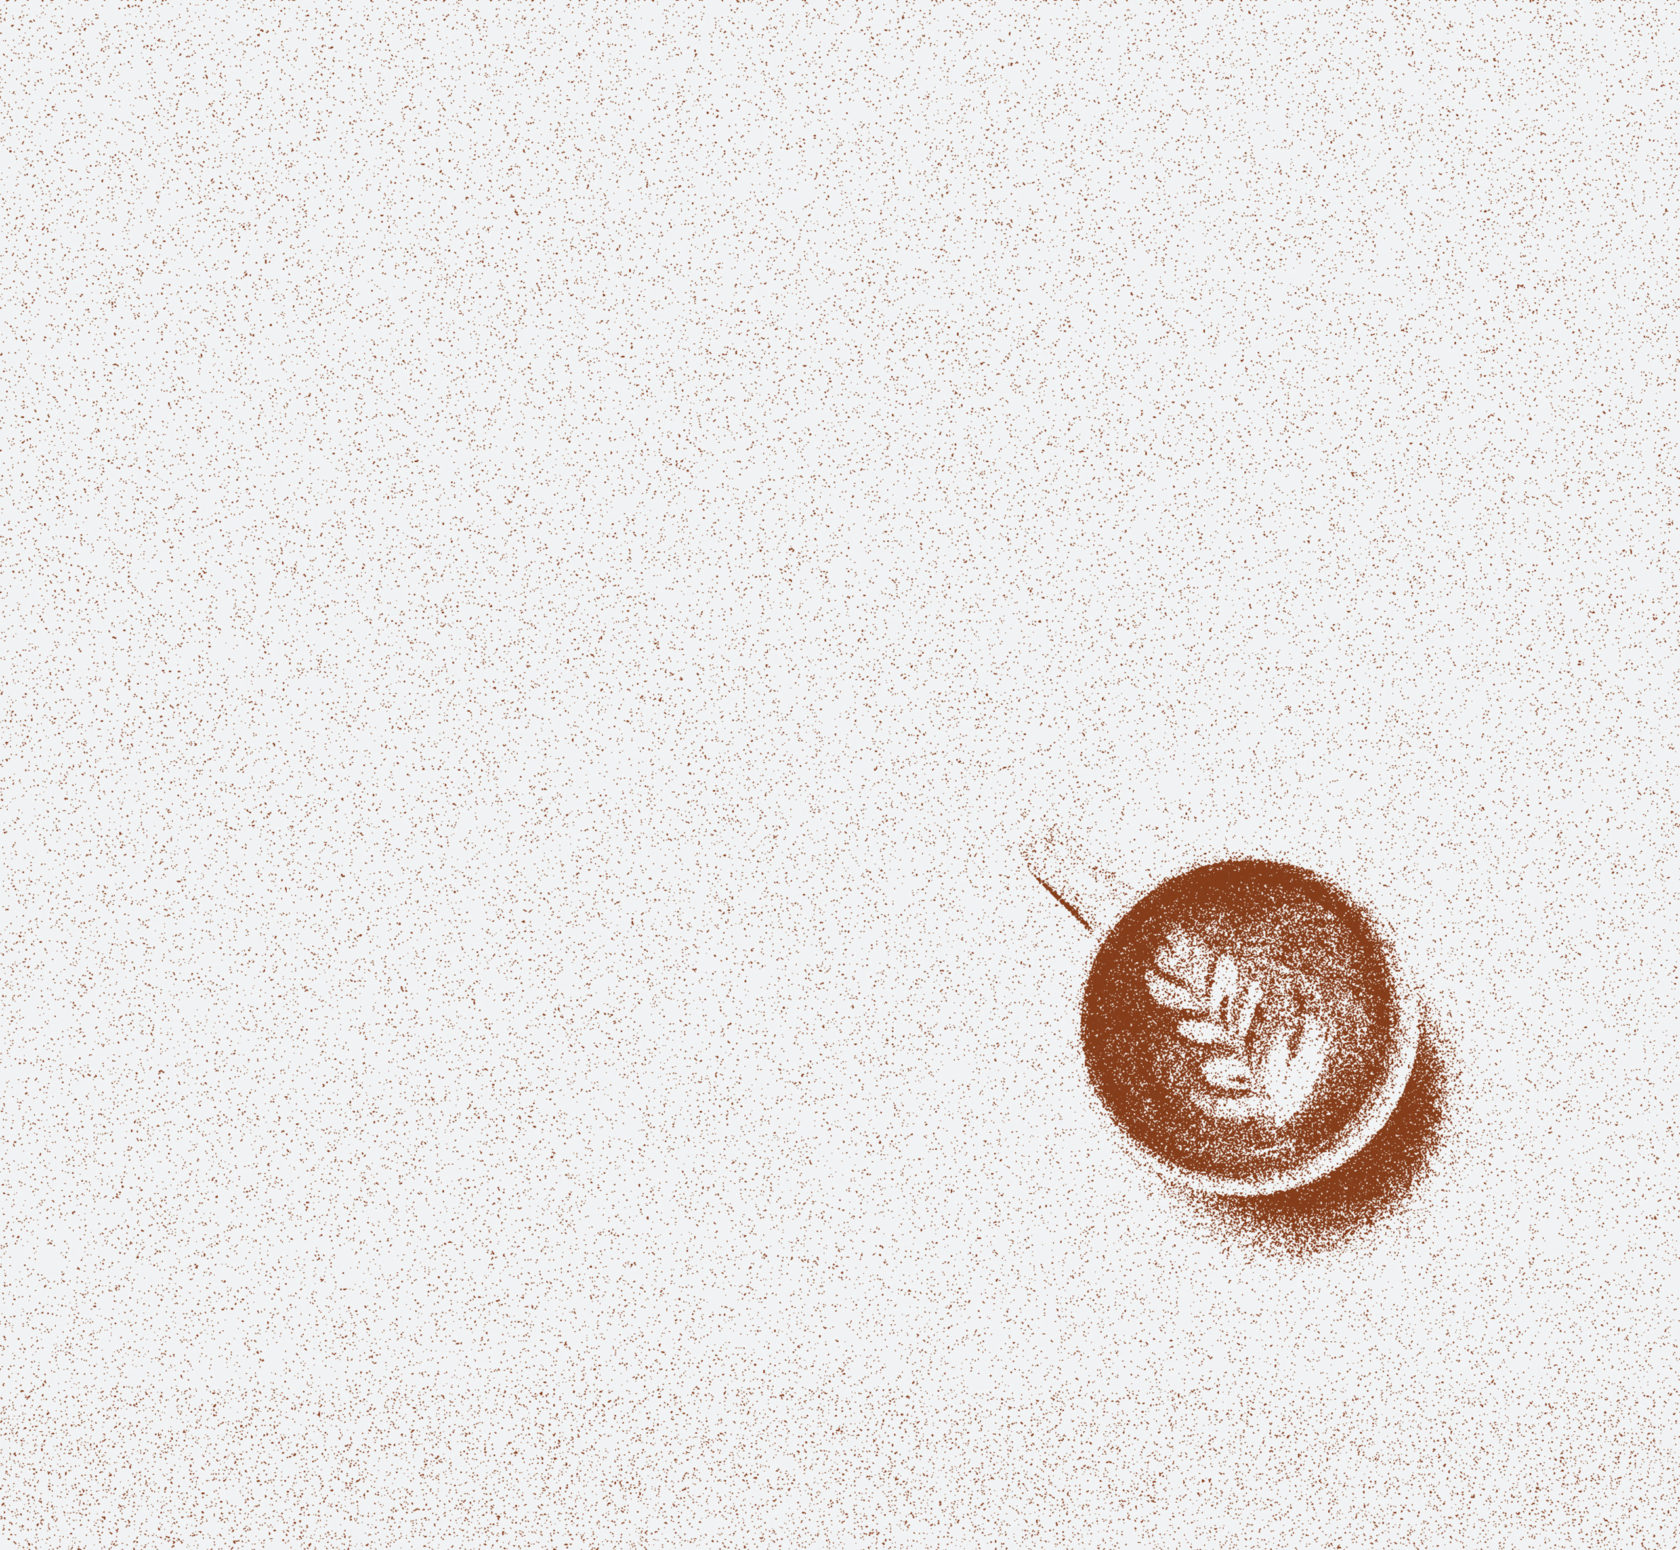 A stylized image of a cappucino